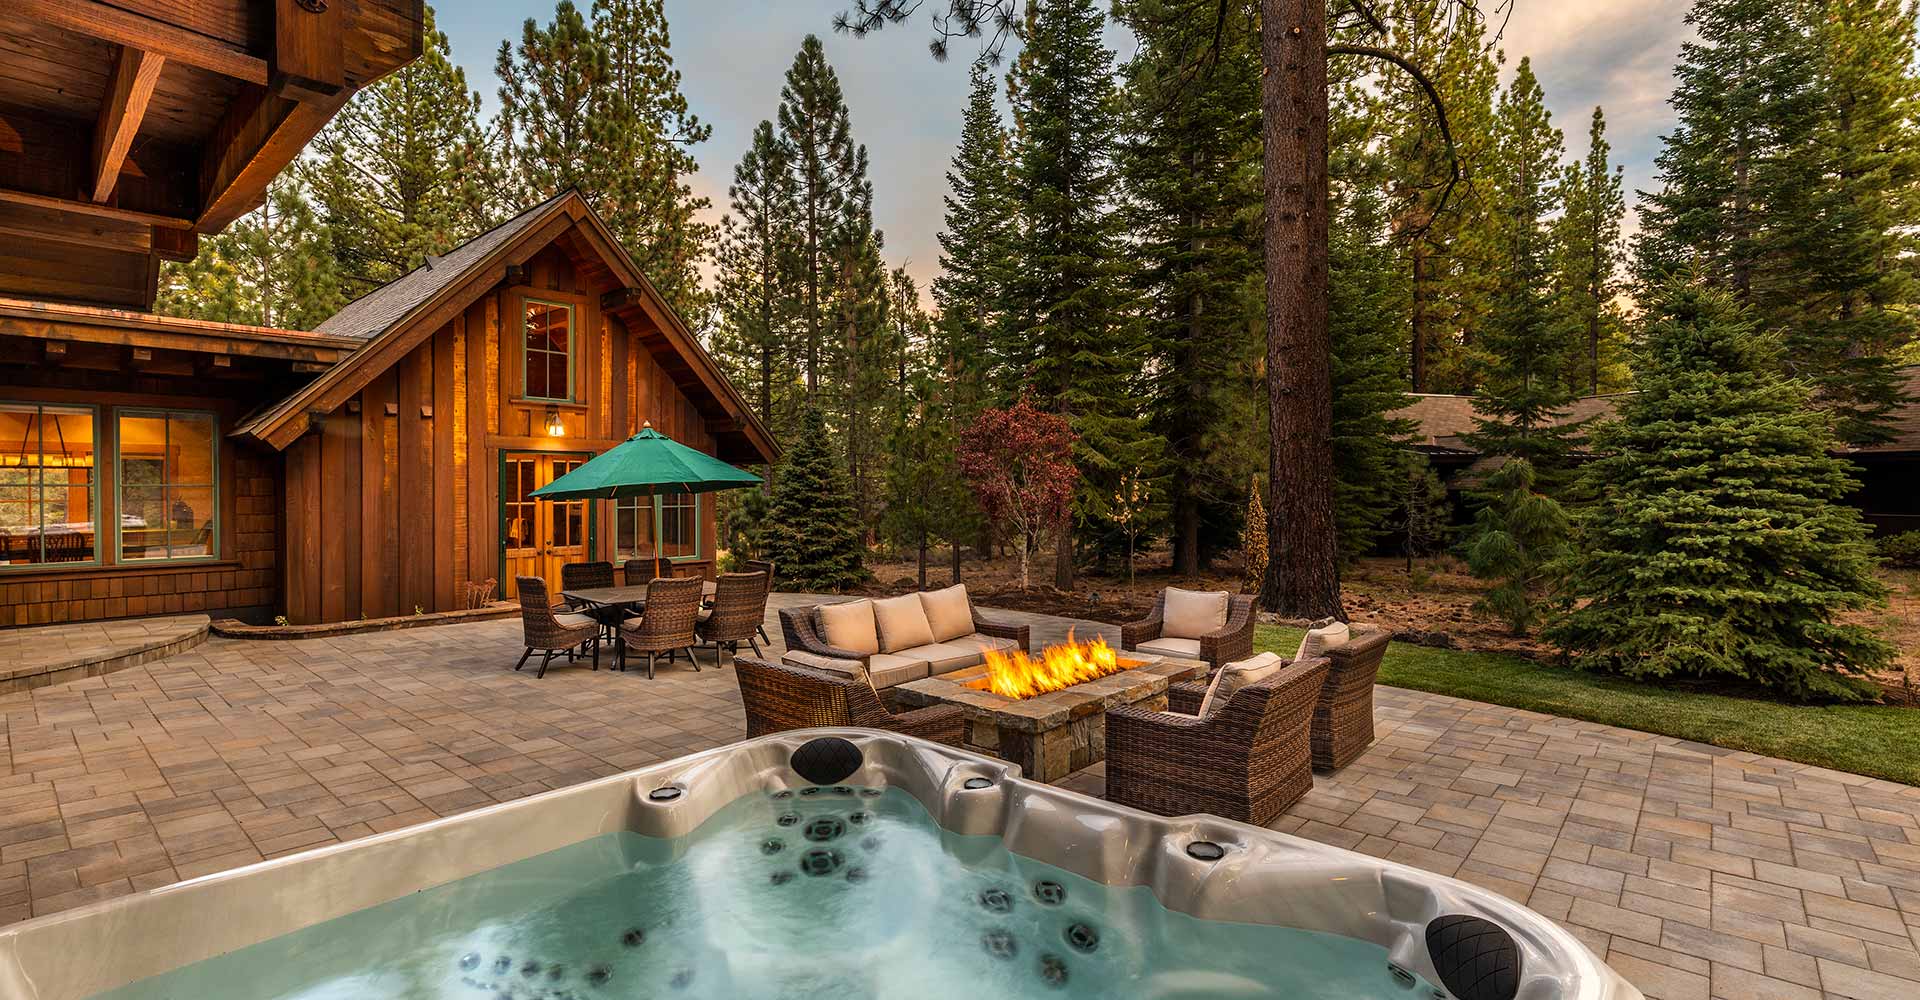 Truckee Lahontan Luxury home for sale - 8455 Lahontan Drive